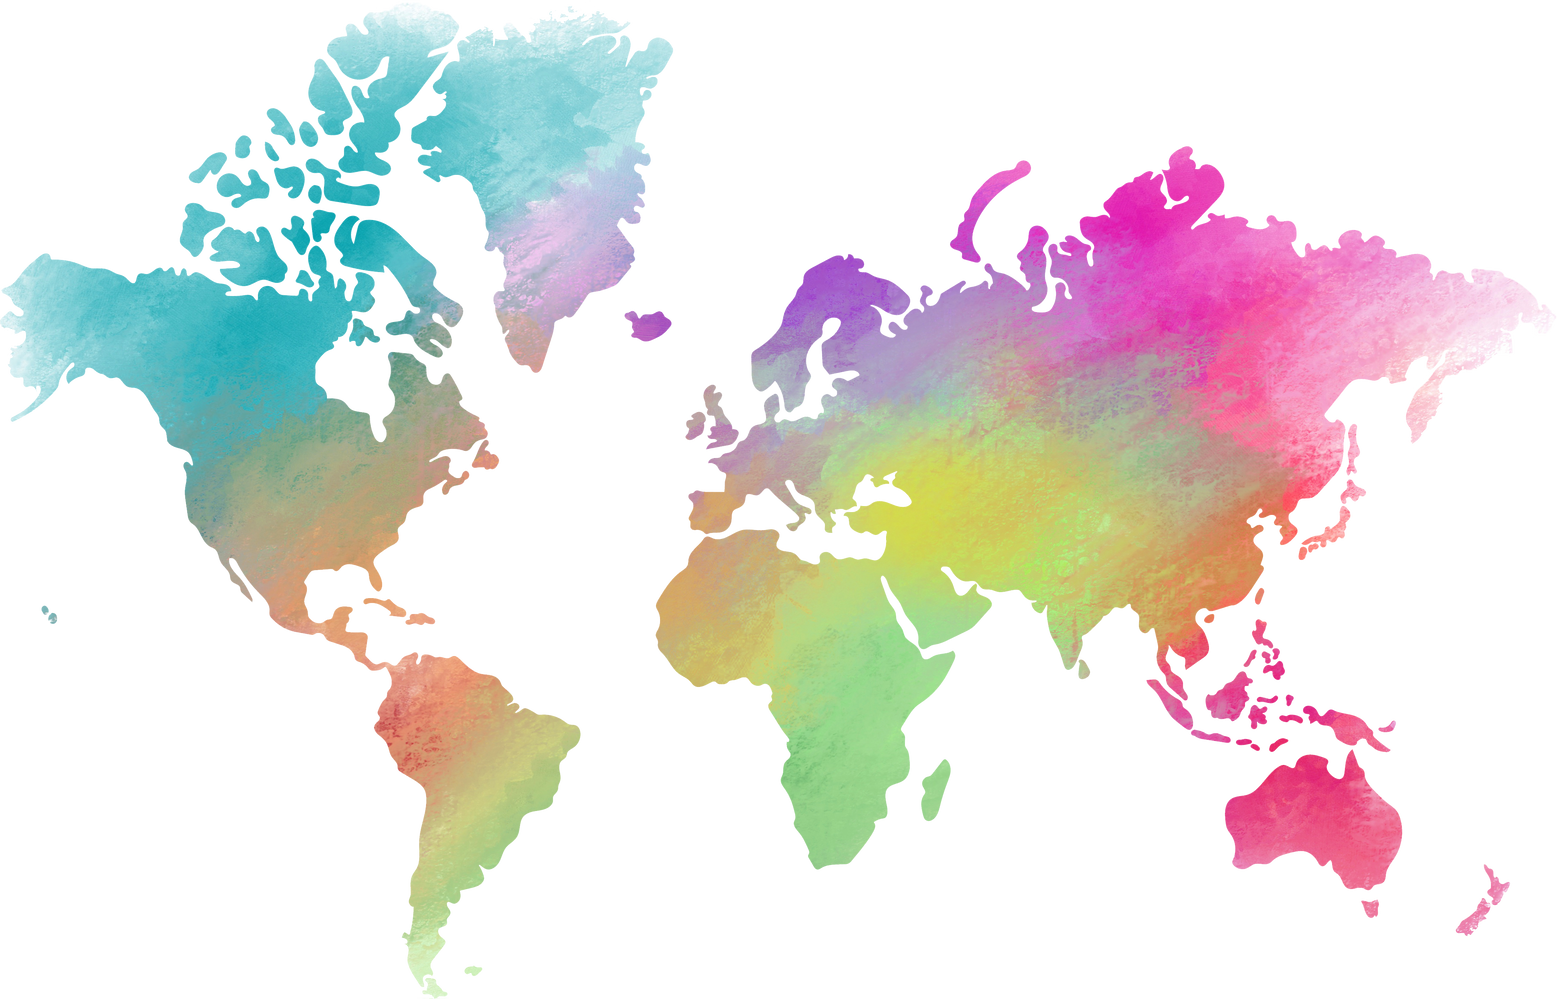 Colorful World Map Watercolor Illustration 